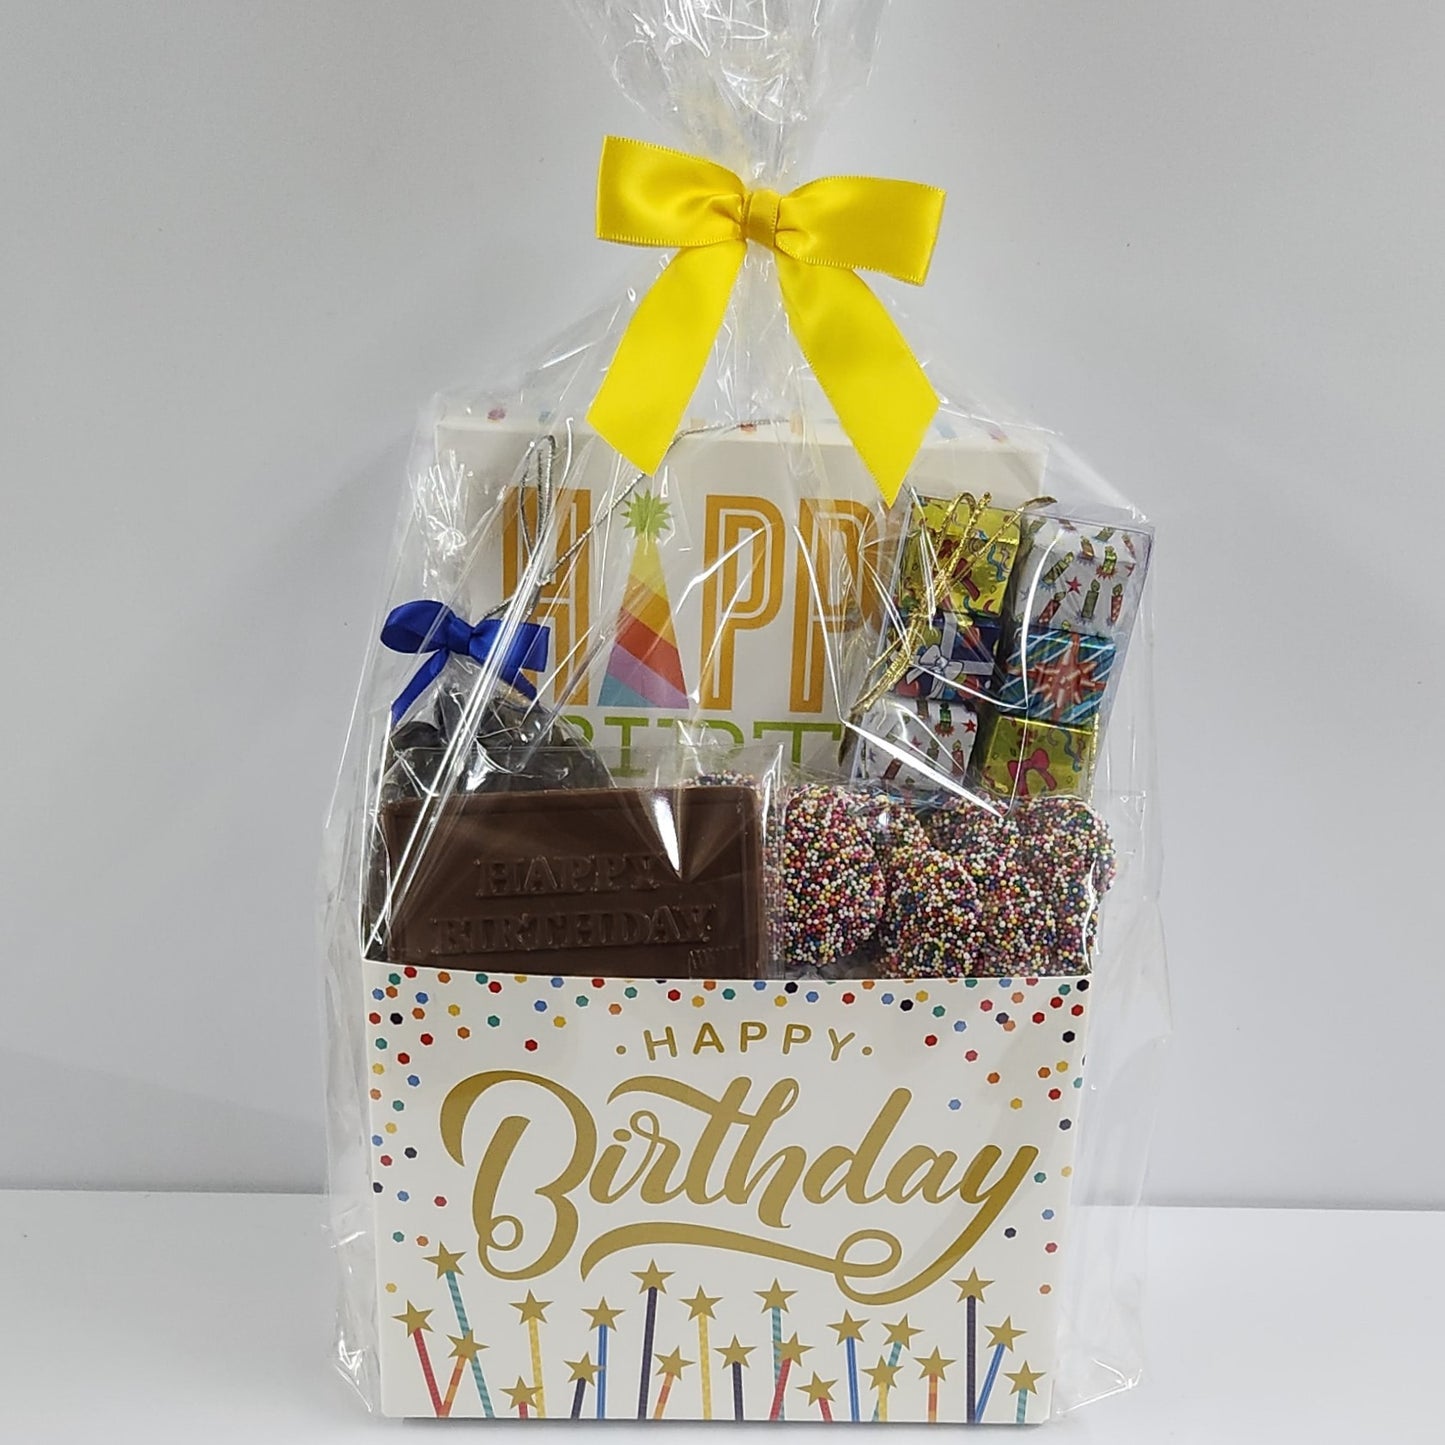 Happy Birthday Candy Gift Basket from Stage Stop Candy wrapped in plastic with a yellow bow